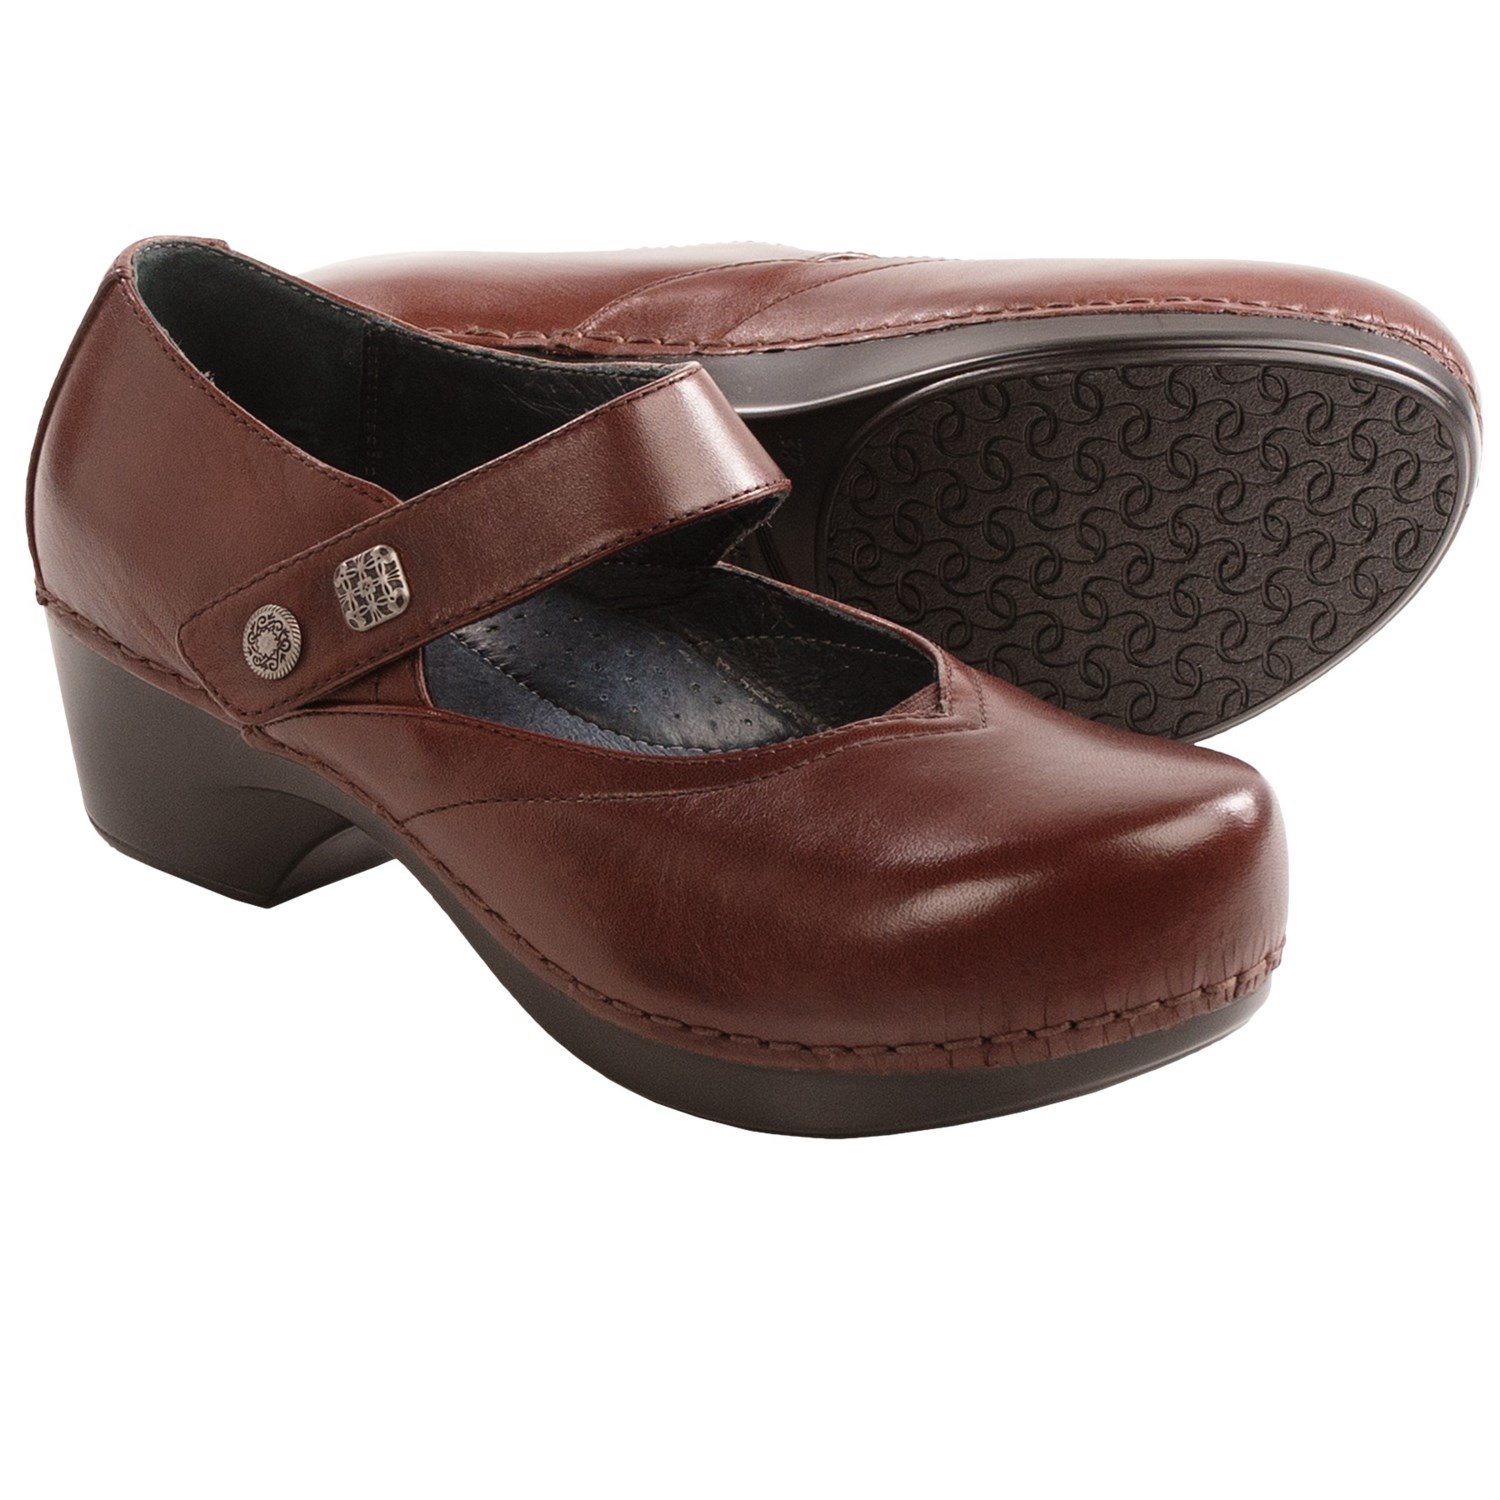 Dansko Tandy Mary Jane Shoes (For Women) - Save 30%